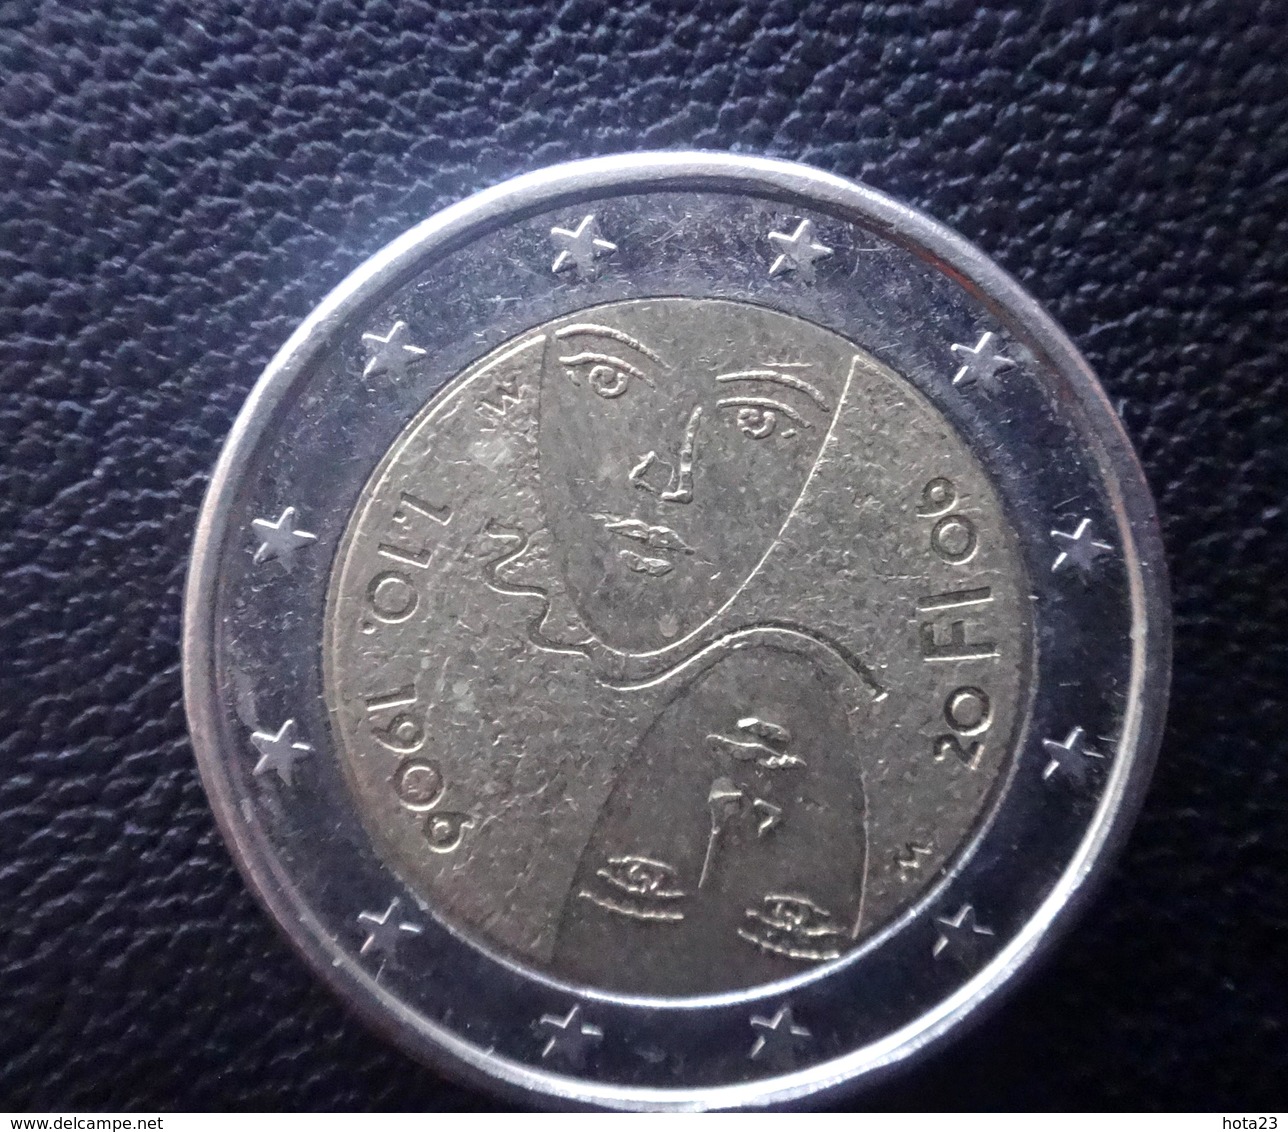 Finland 2 Euro 2006  100th Anniversary Of The Universal And Equal Suffrage  CIRCULATED - Finland